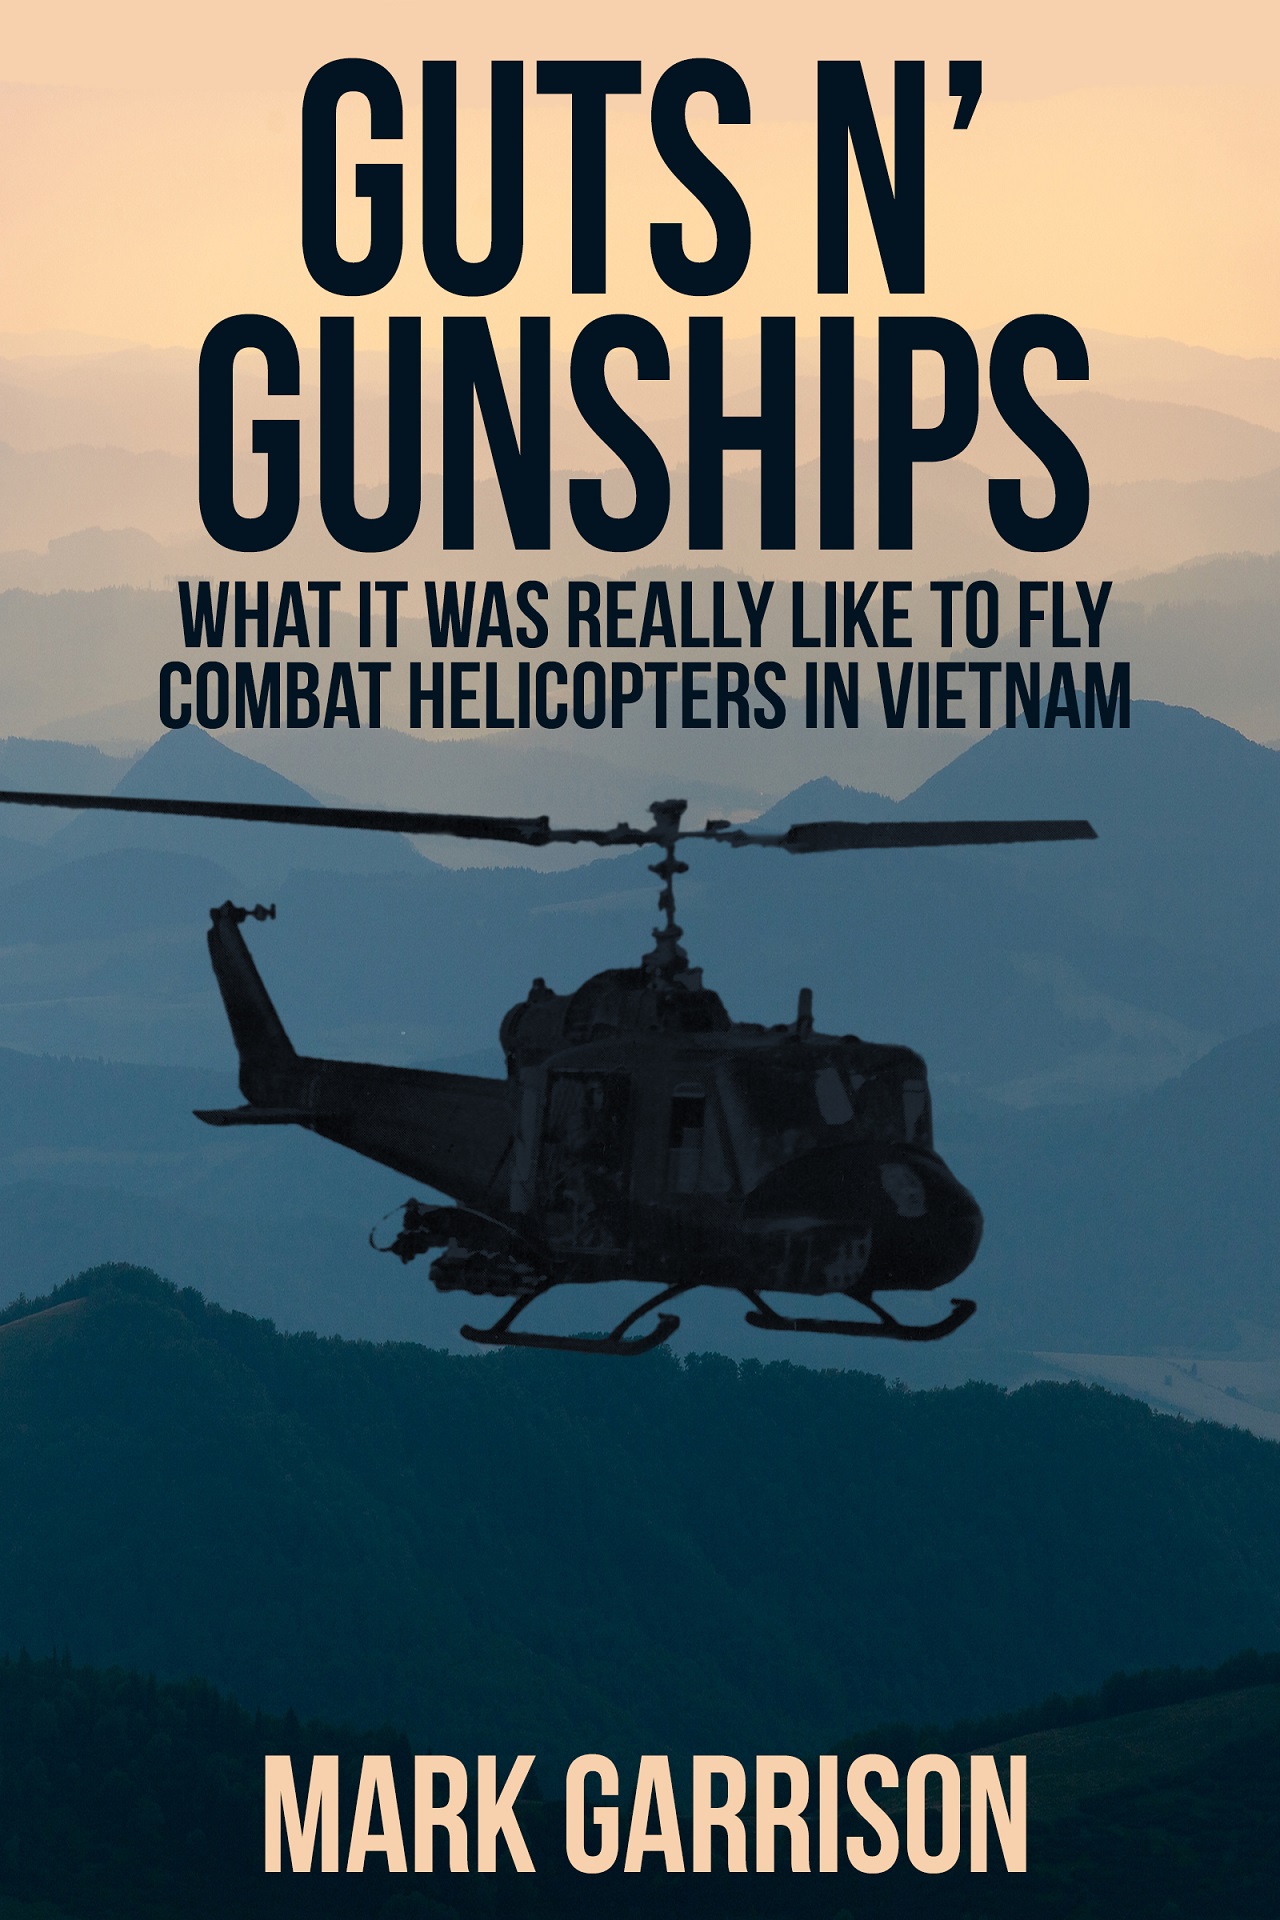 True stories of life as a helicopter pilot in Vietnam | Latest press